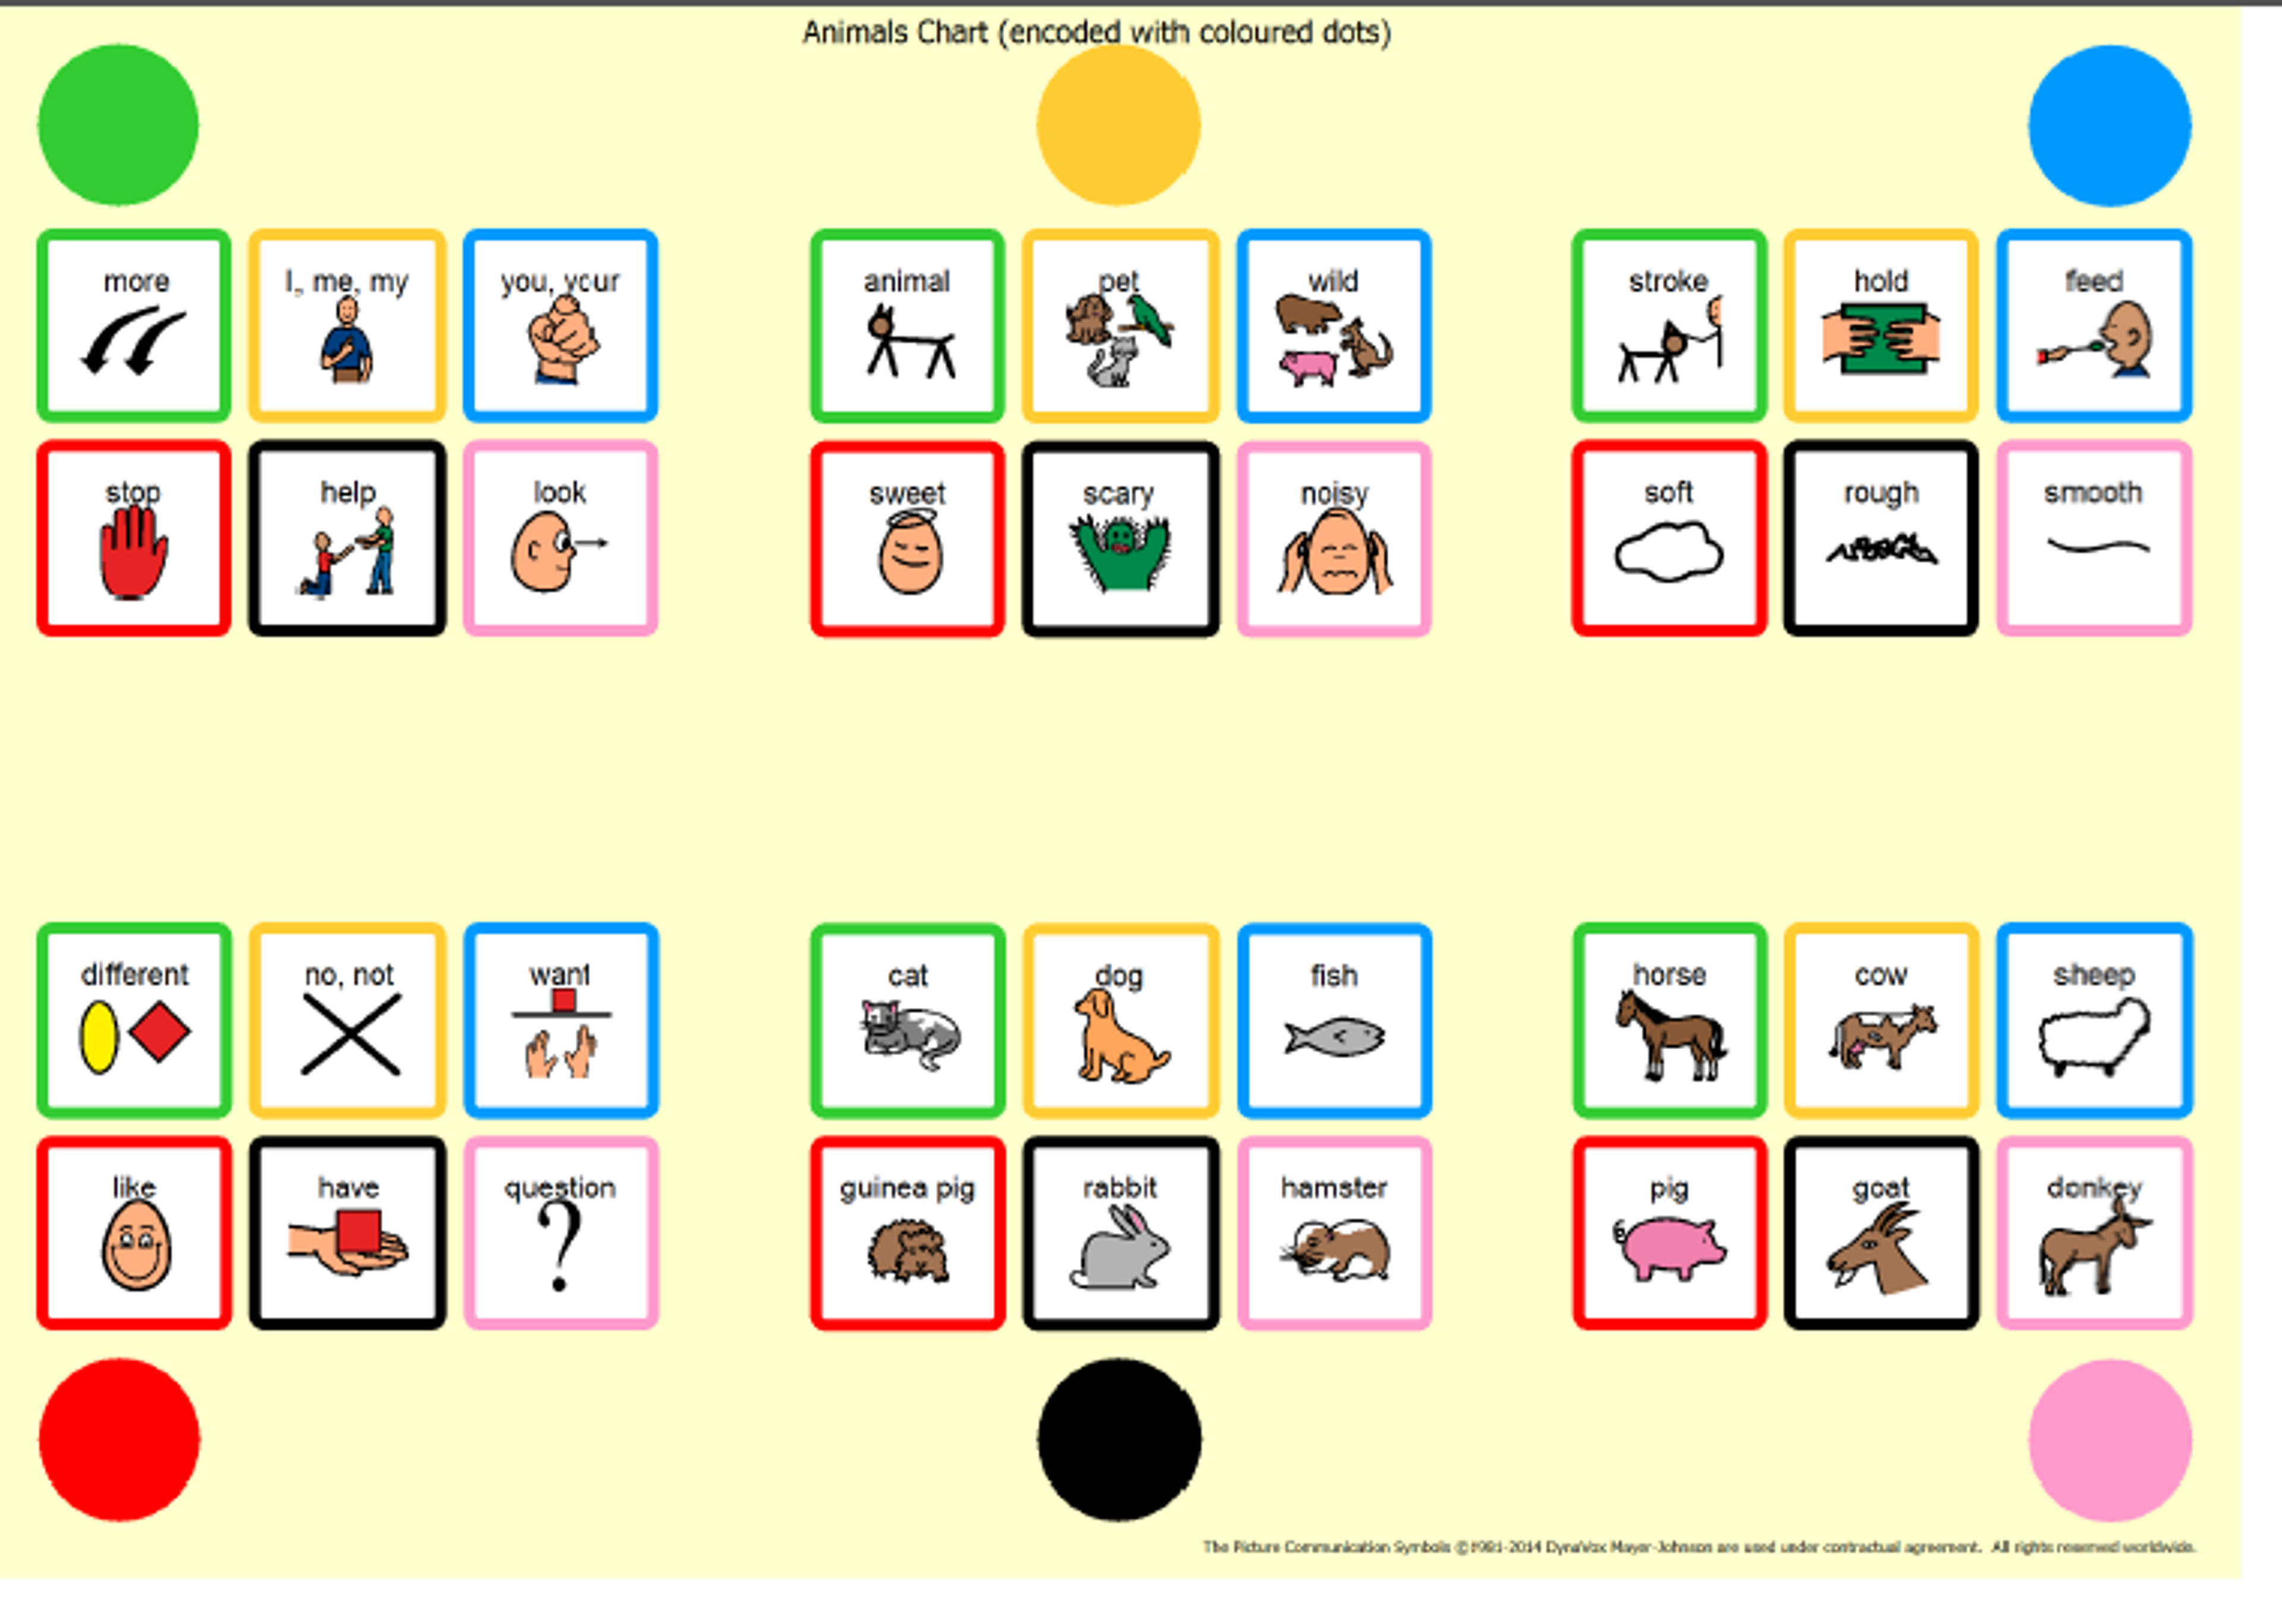 An thumbnail for the post: Animals 36 colour encoded with dots